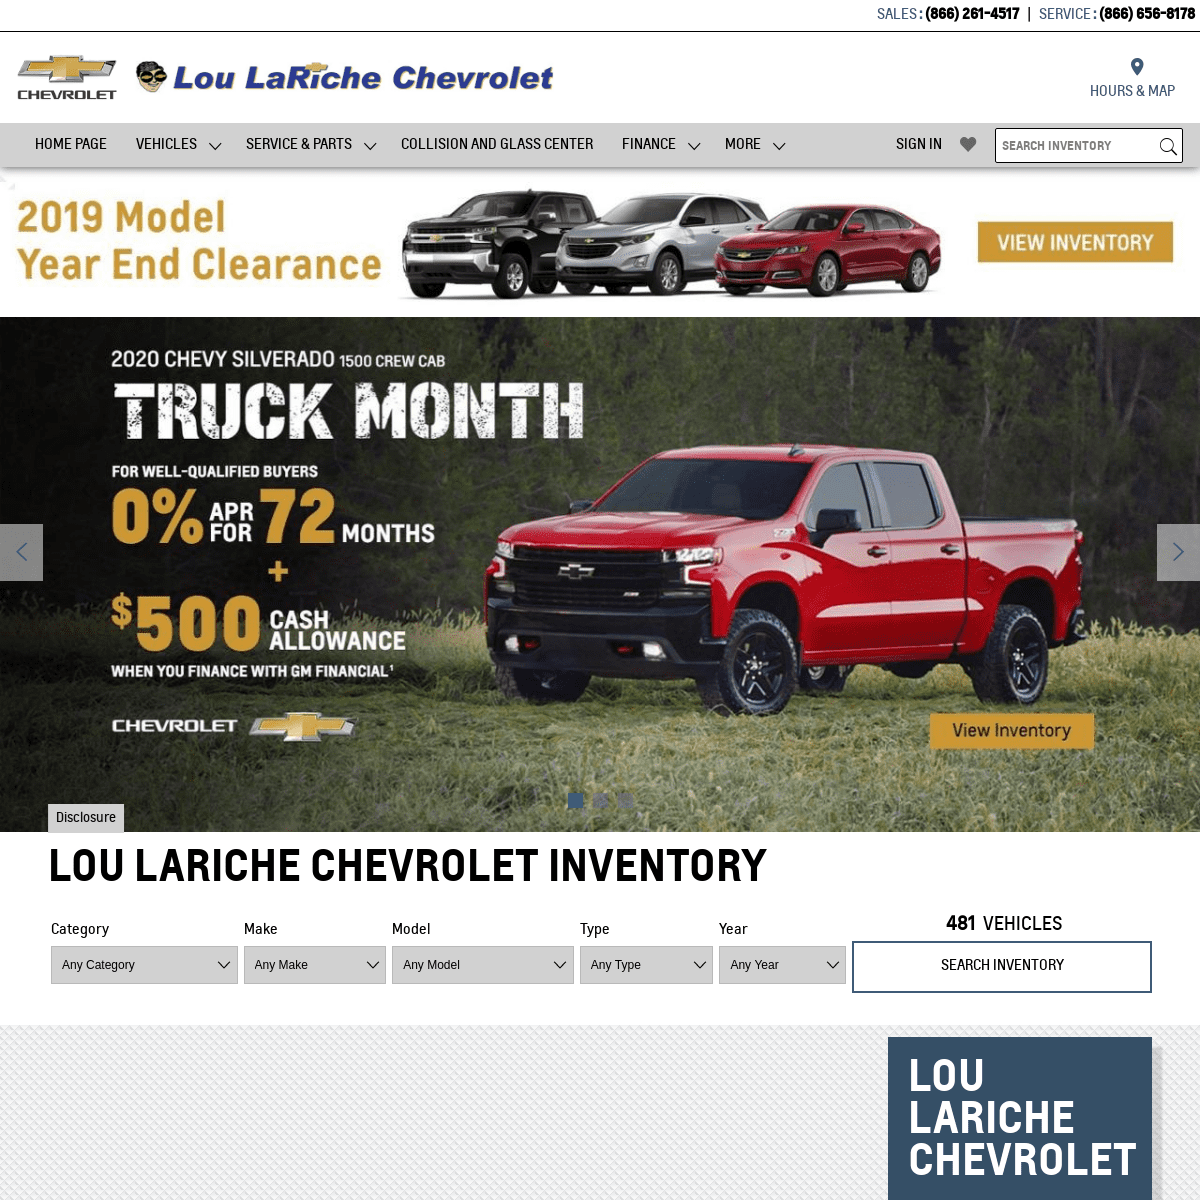 A complete backup of louchevy.com